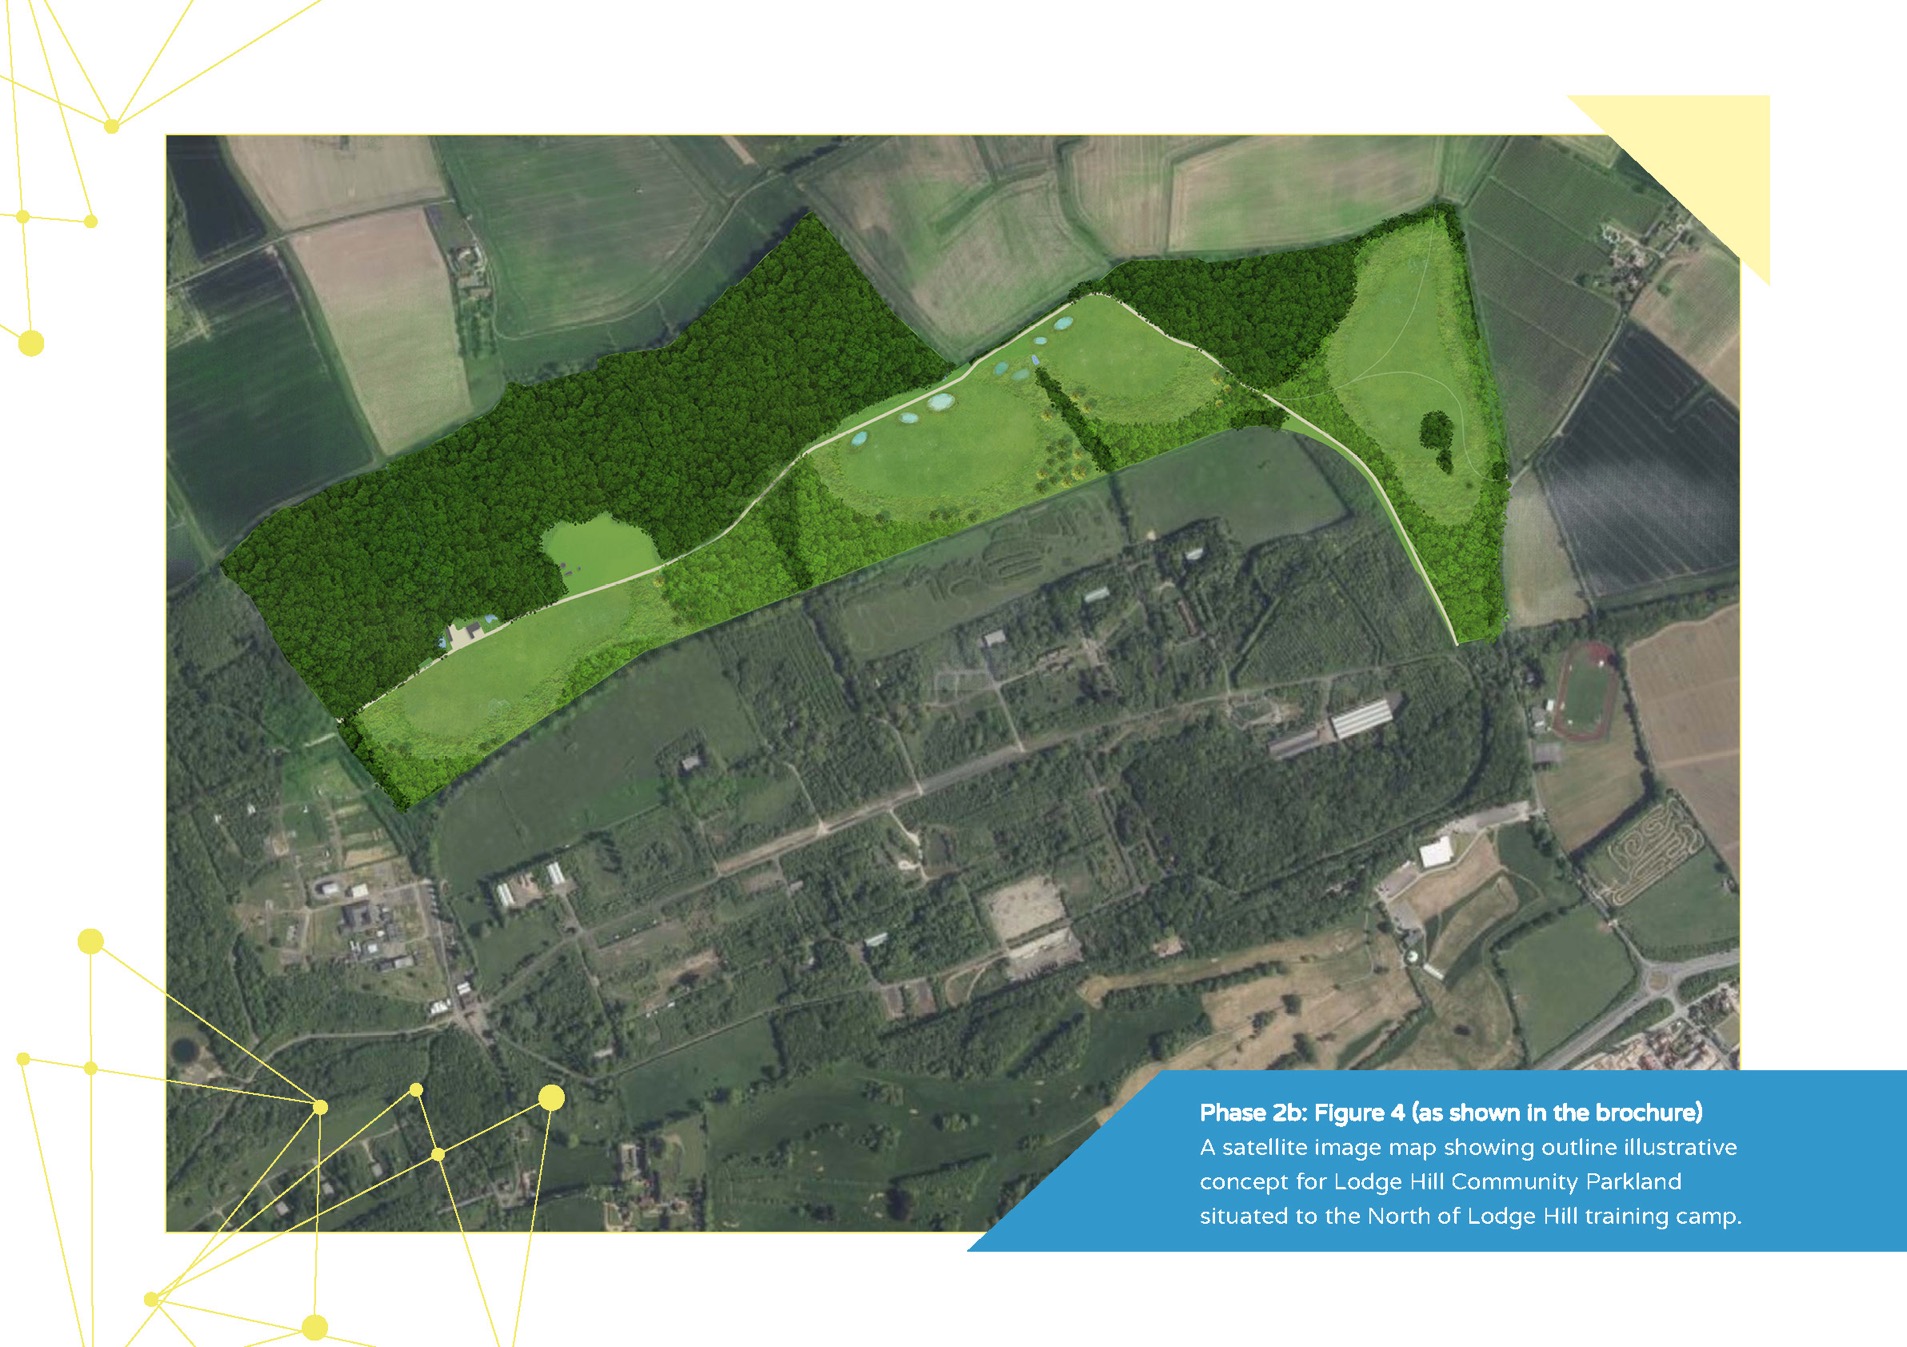 A satellite image map showing outline illustrative concept for Lodge Hill Community Parkland situated to the North of Lodge Hill training camp